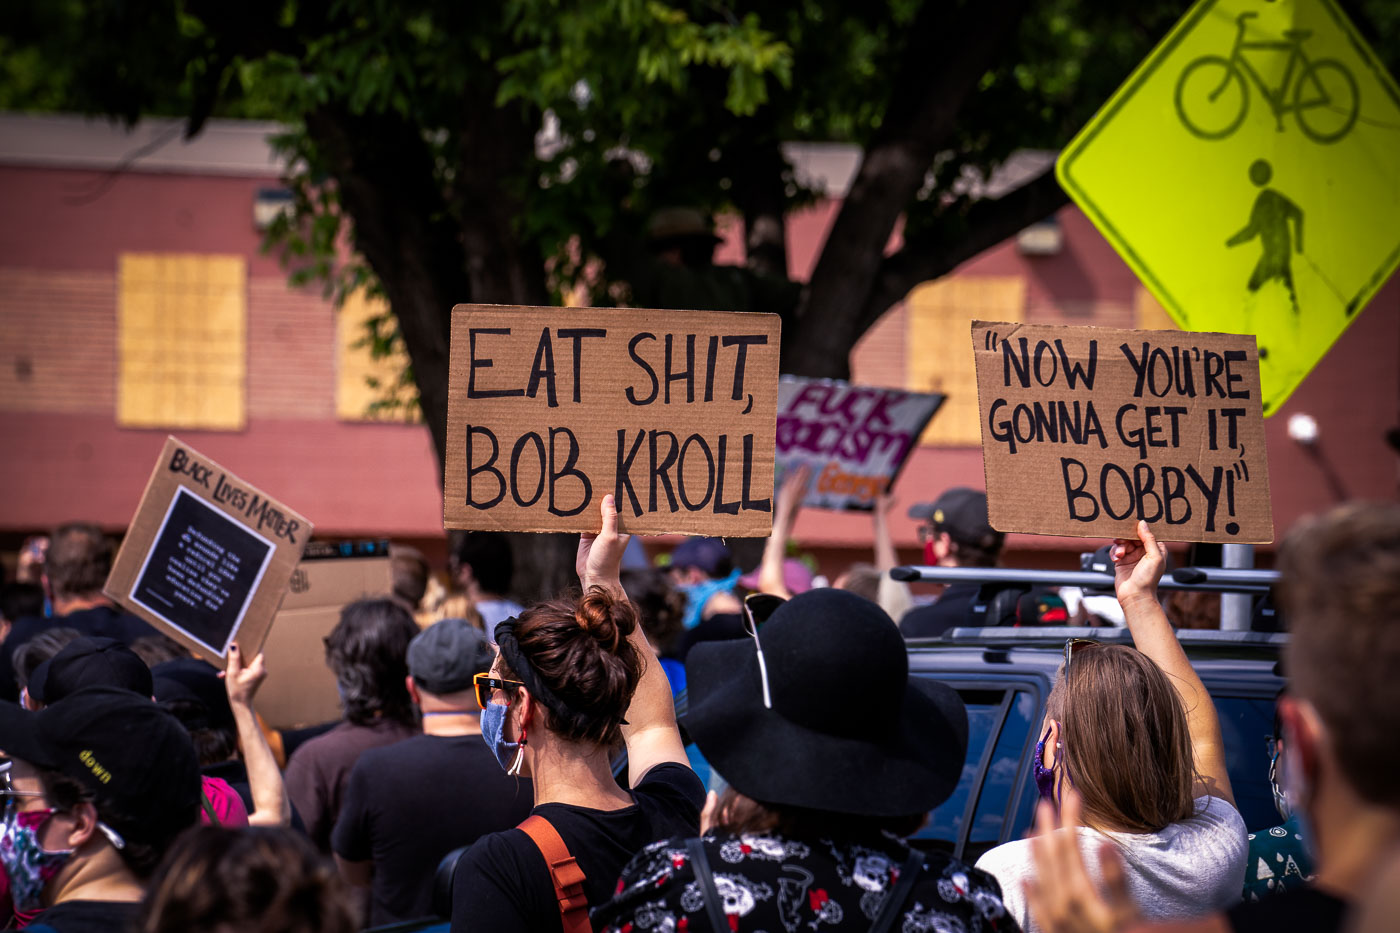 Protesters holding up signs asking for Bob Kroll to resign